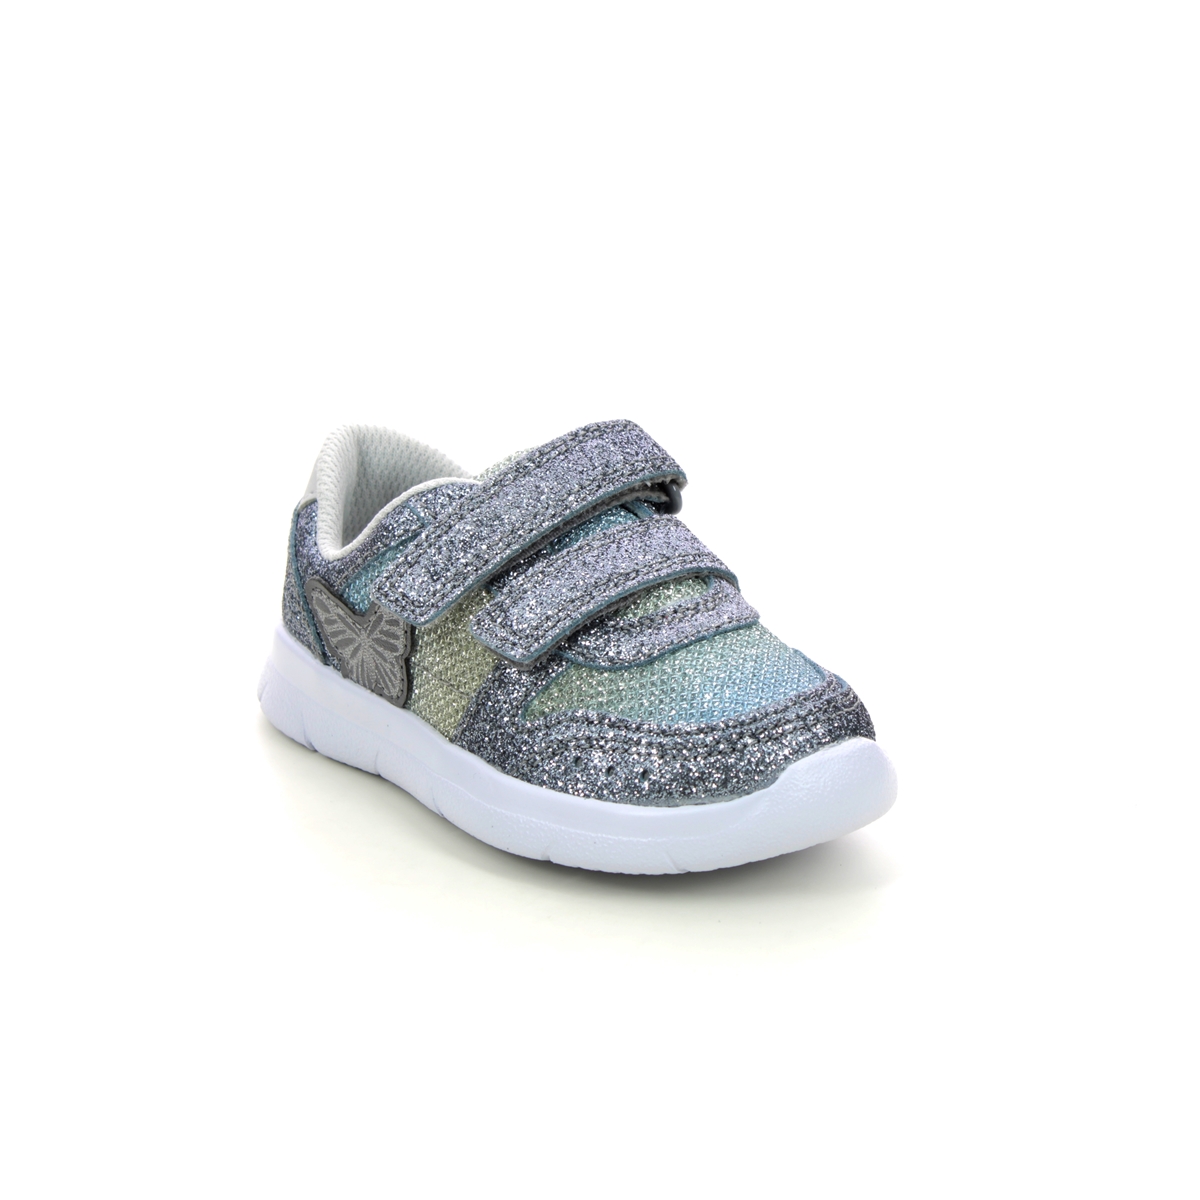 Clarks Ath Wing T Metallic Kids Toddler Girls Trainers 623197G In Size 7.5 In Plain Metallic G Width Fitting For kids